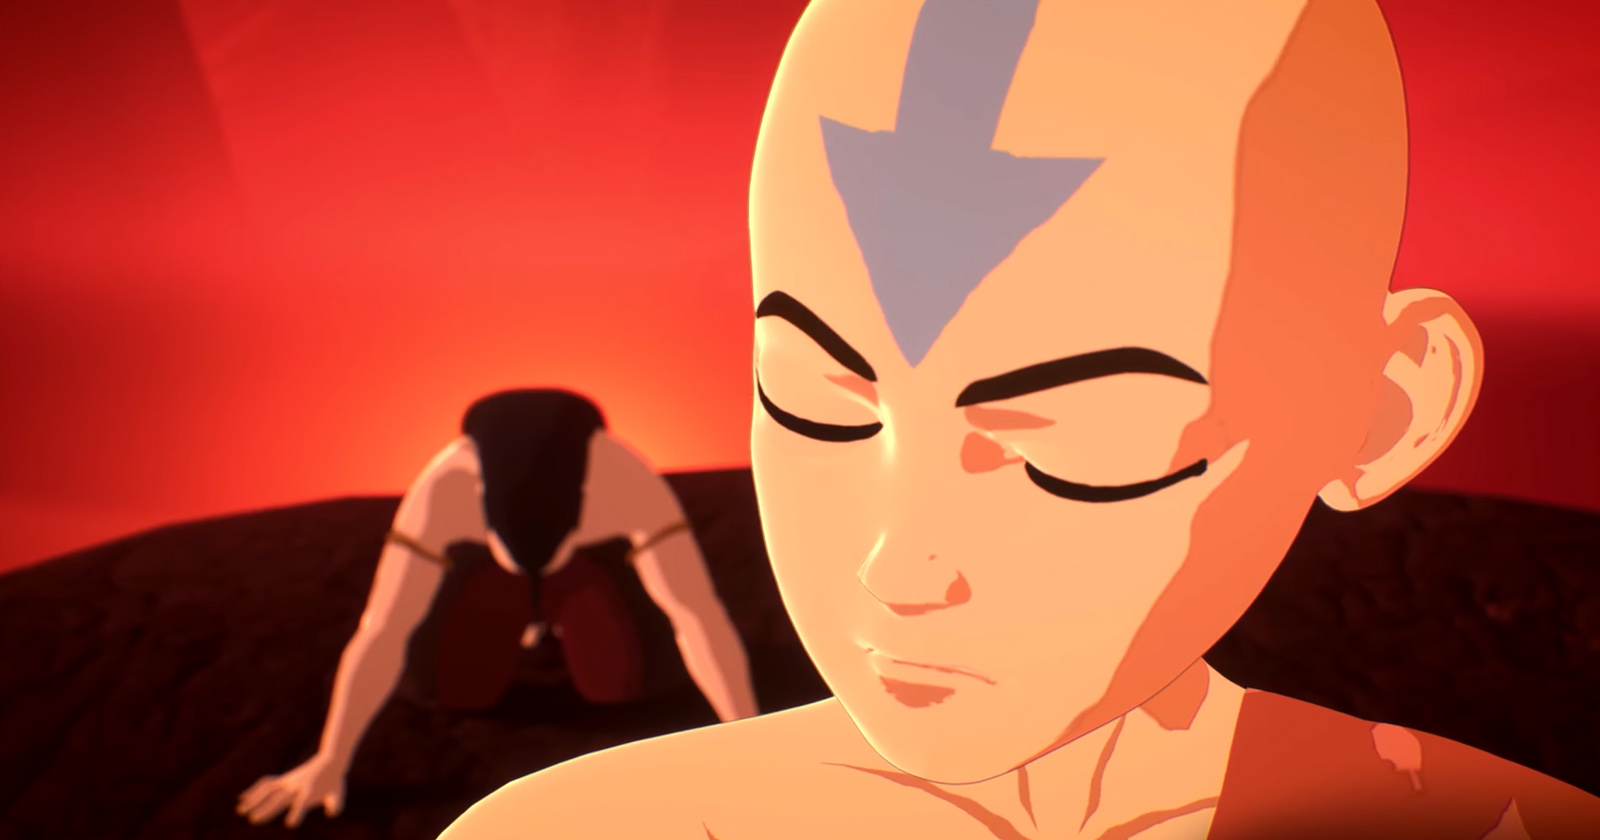 New trailer for Avatar: The Last Airbender game has been released!